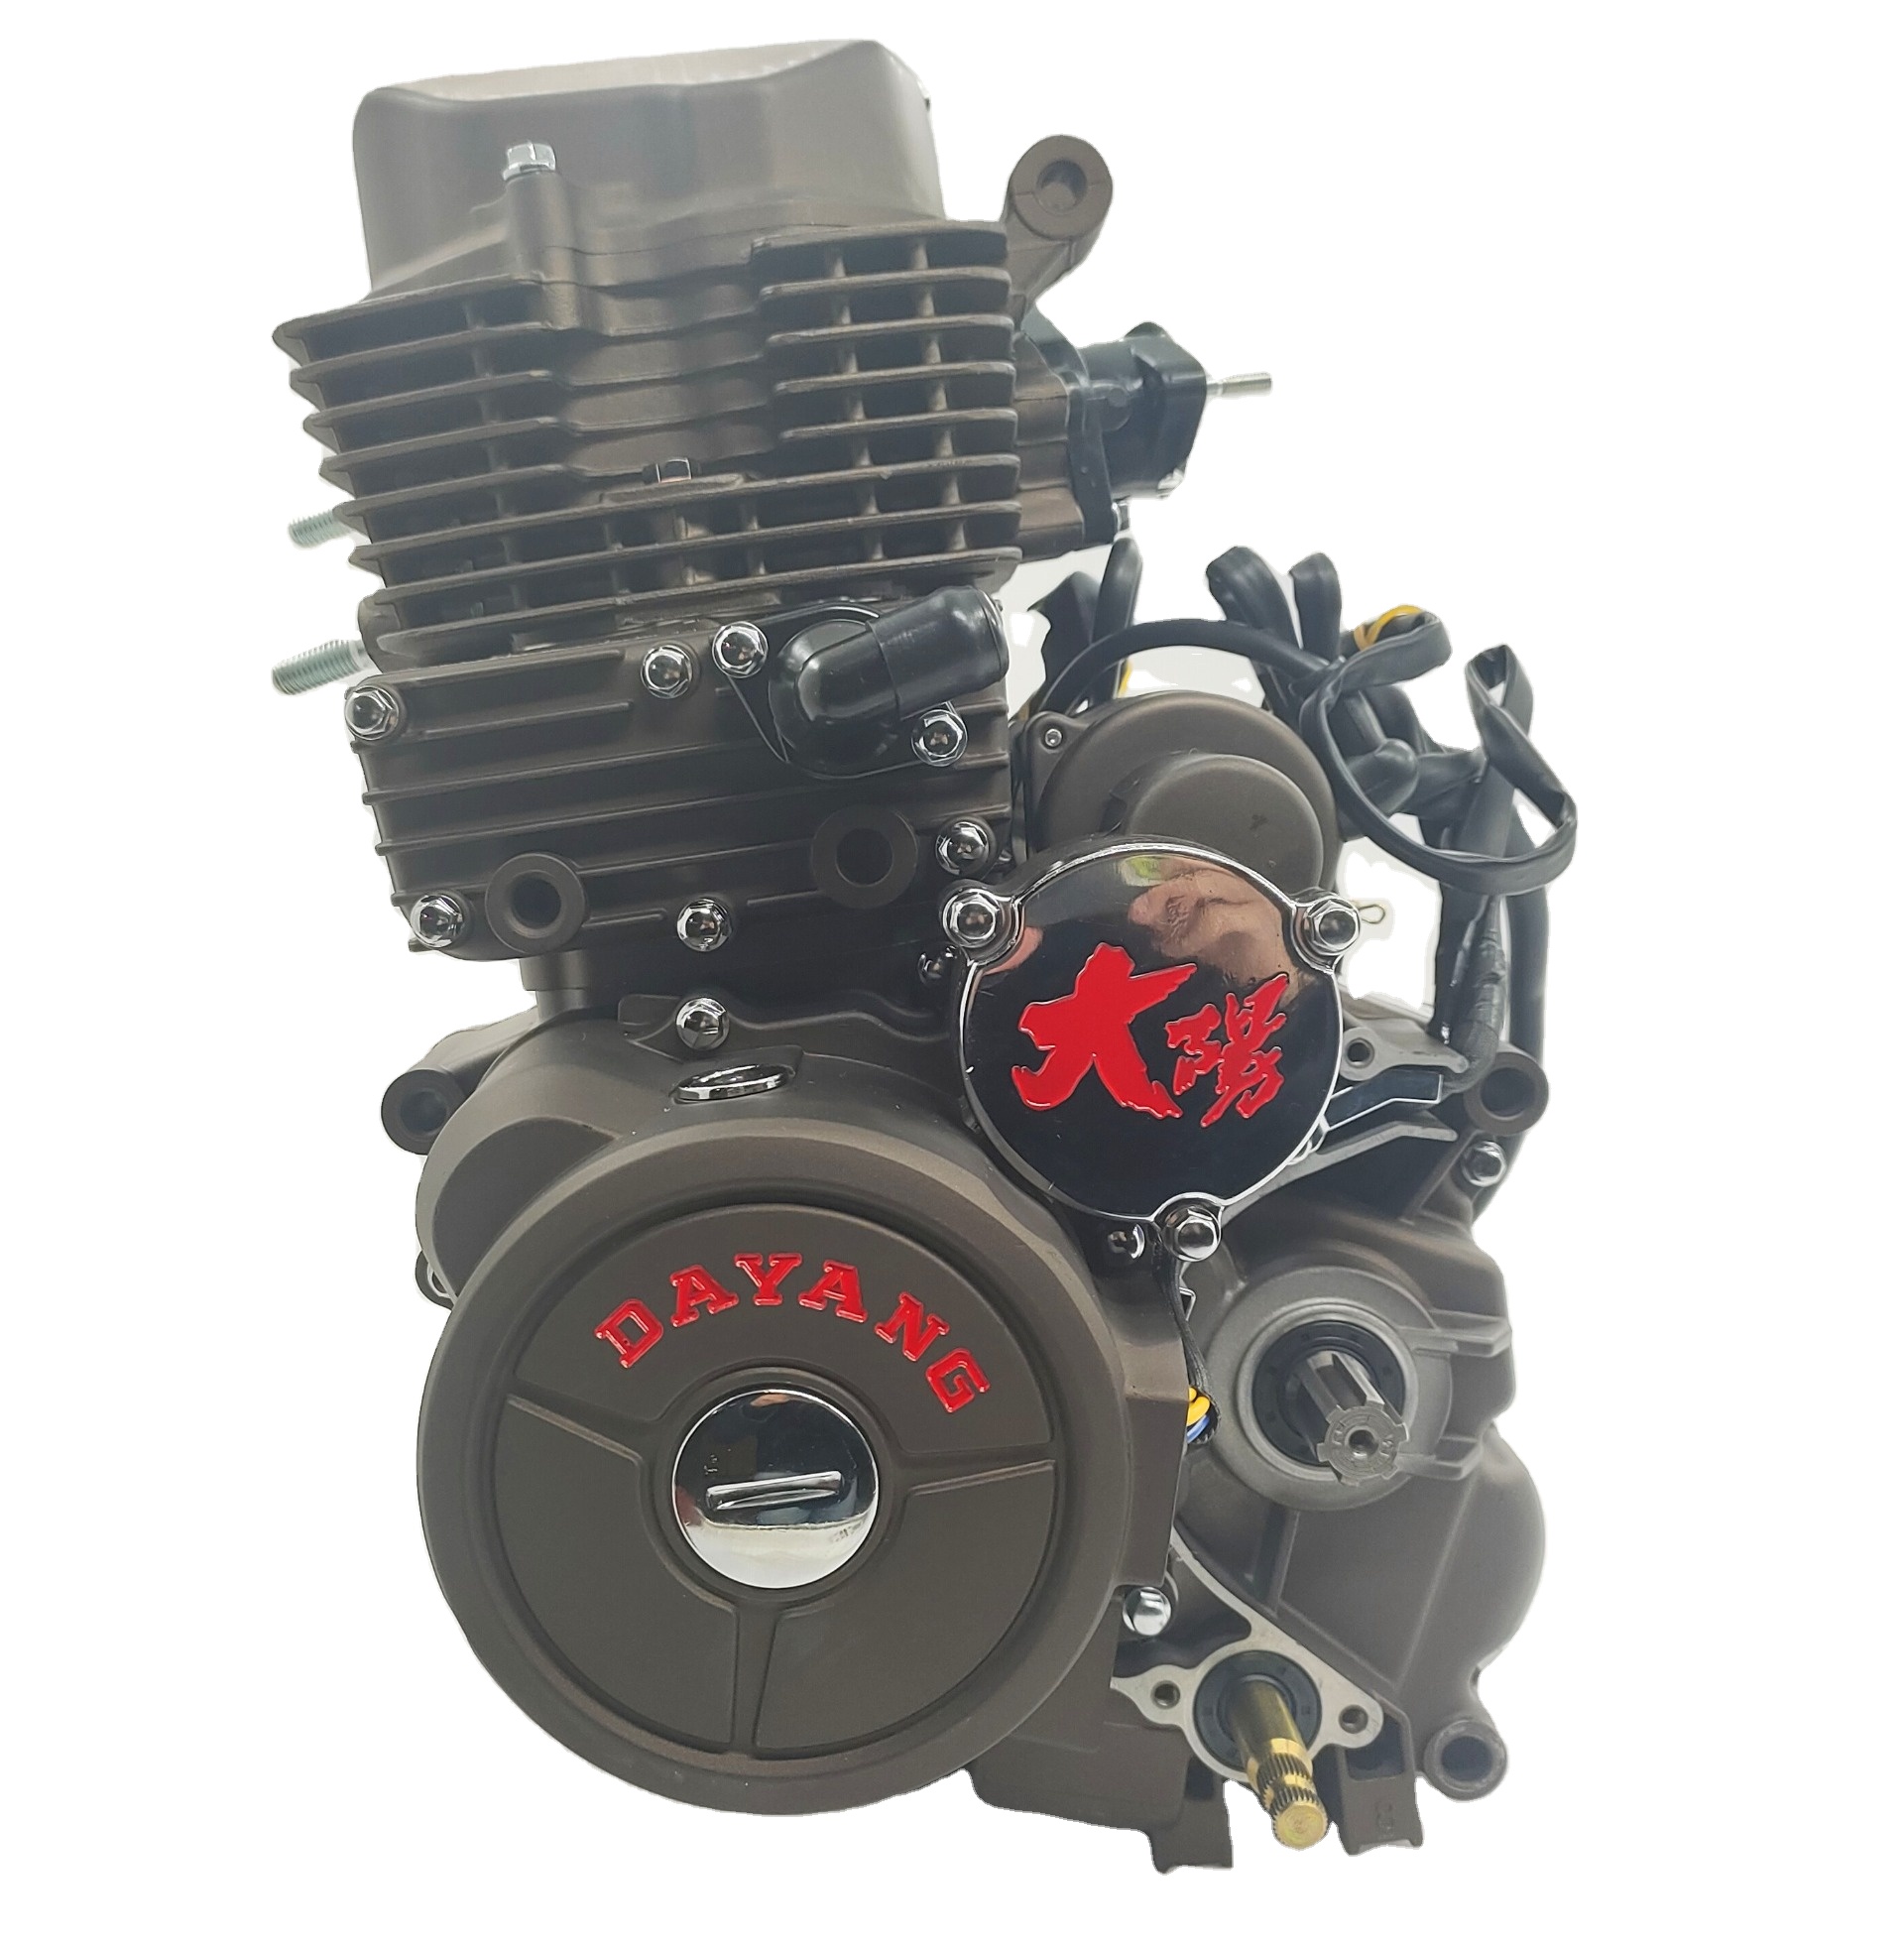 DAYANG MOTOR Factory Petrol Three Wheel Motorcycle parts Tricycle Engine  CG175cc with water pump Engine